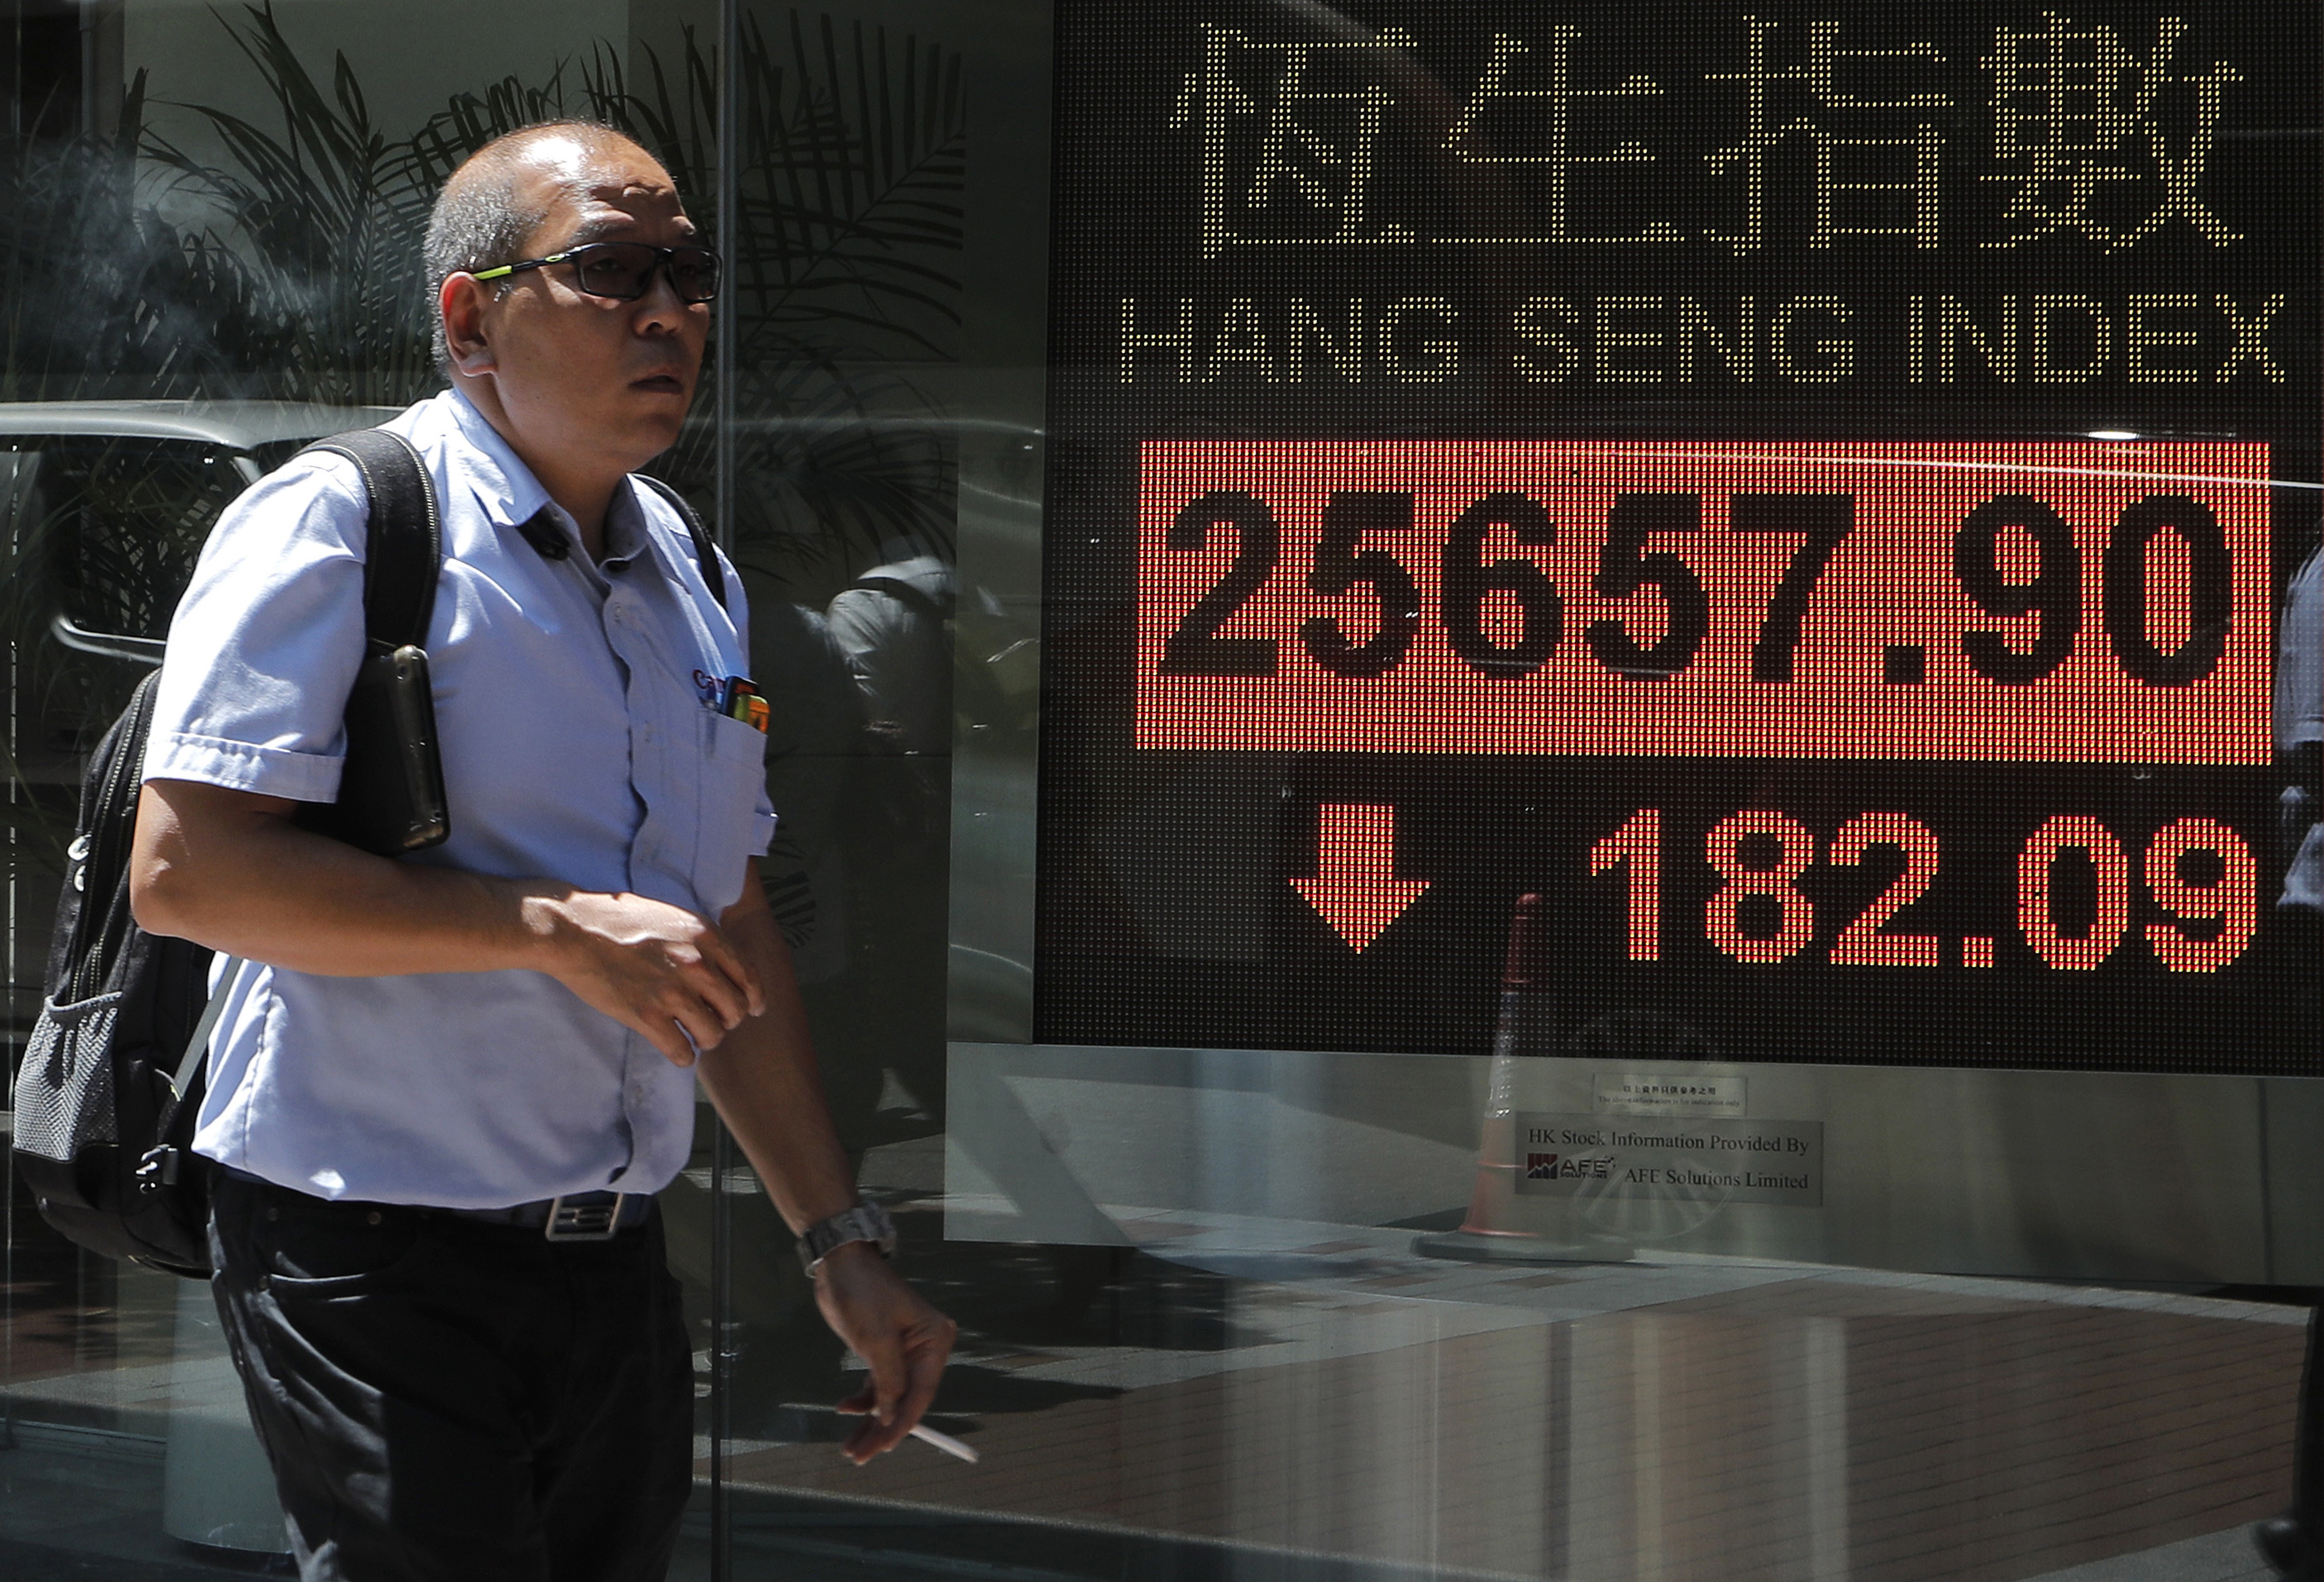 Hong Kong and China stocks could be in the final stages of a rally before a bear market sets in, CCB equity analysts said. Photo: AP